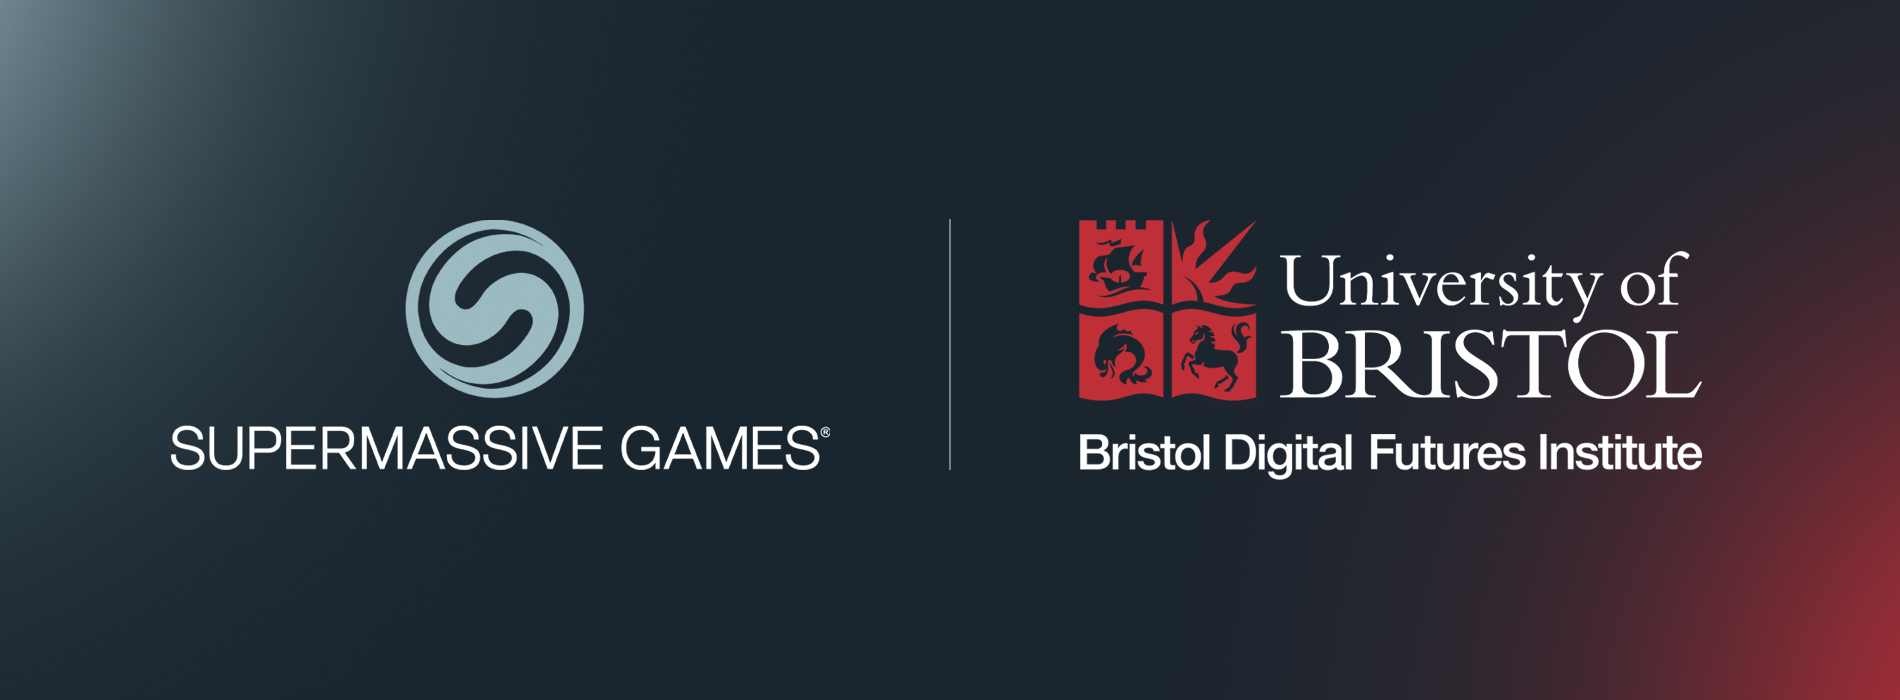 Supermassive Games and BDFI logos